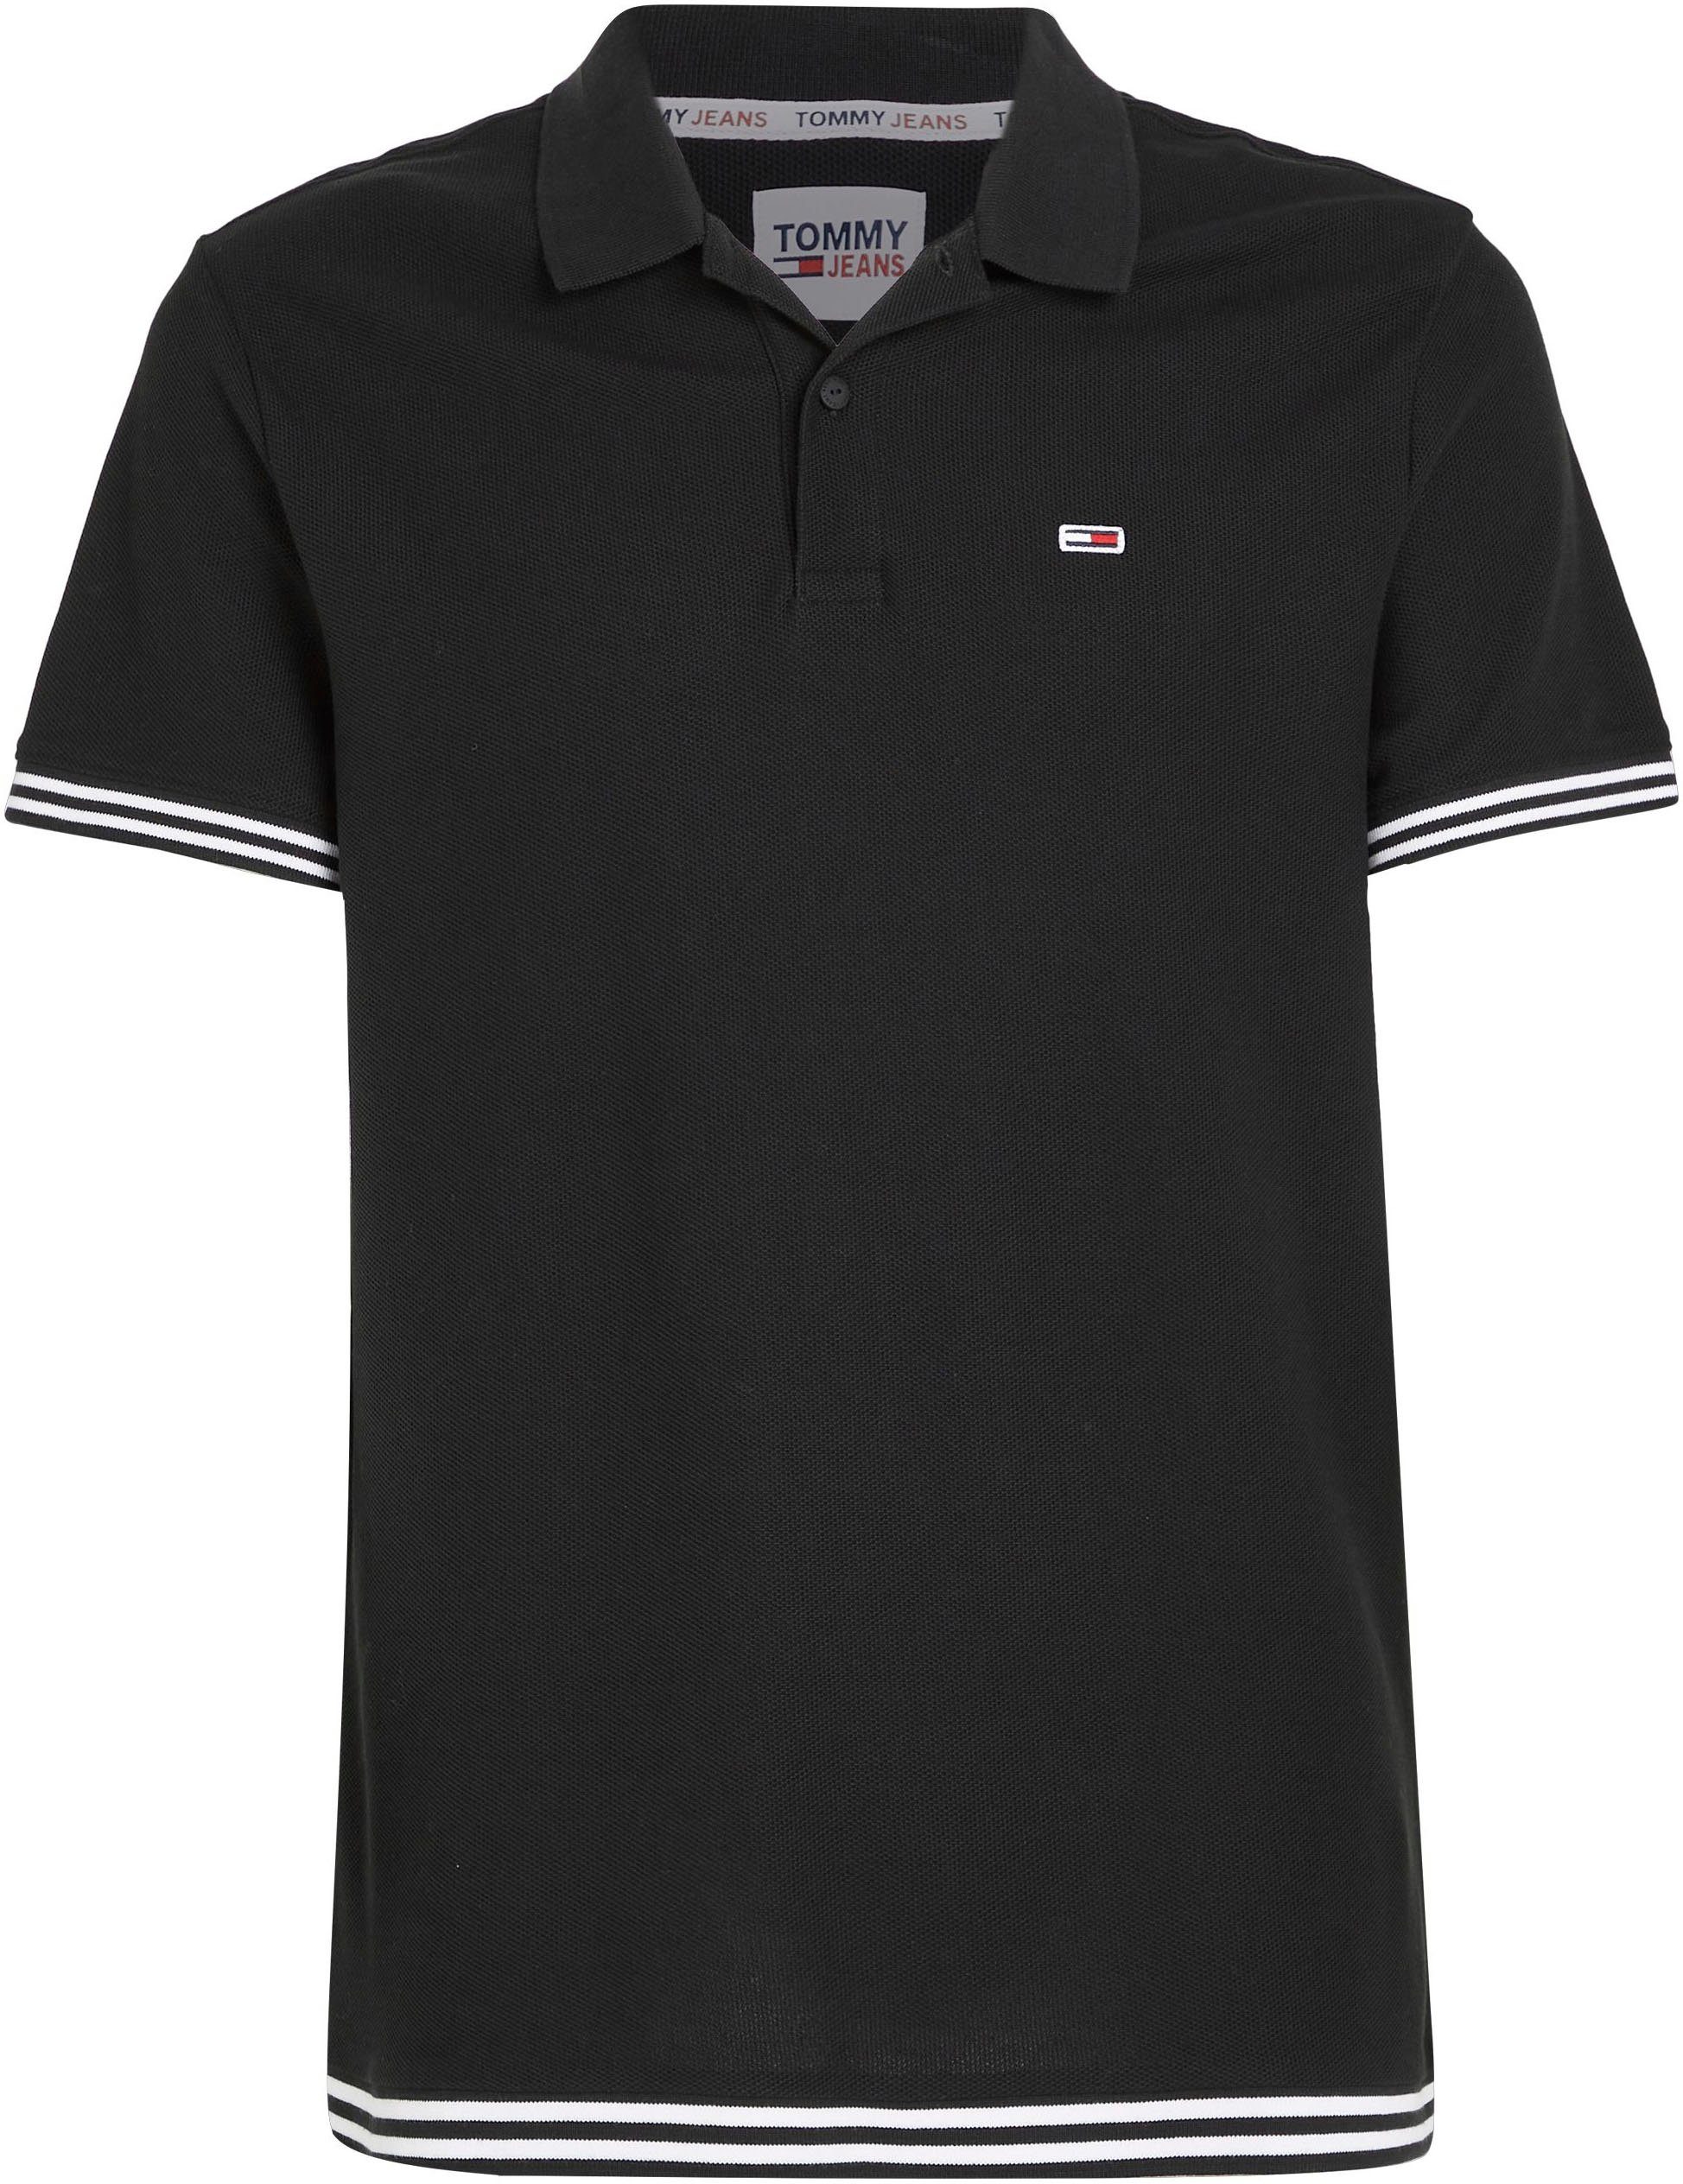 TJM Poloshirt Polokragen Jeans CLSC Black Tommy mit POLO TIPPING